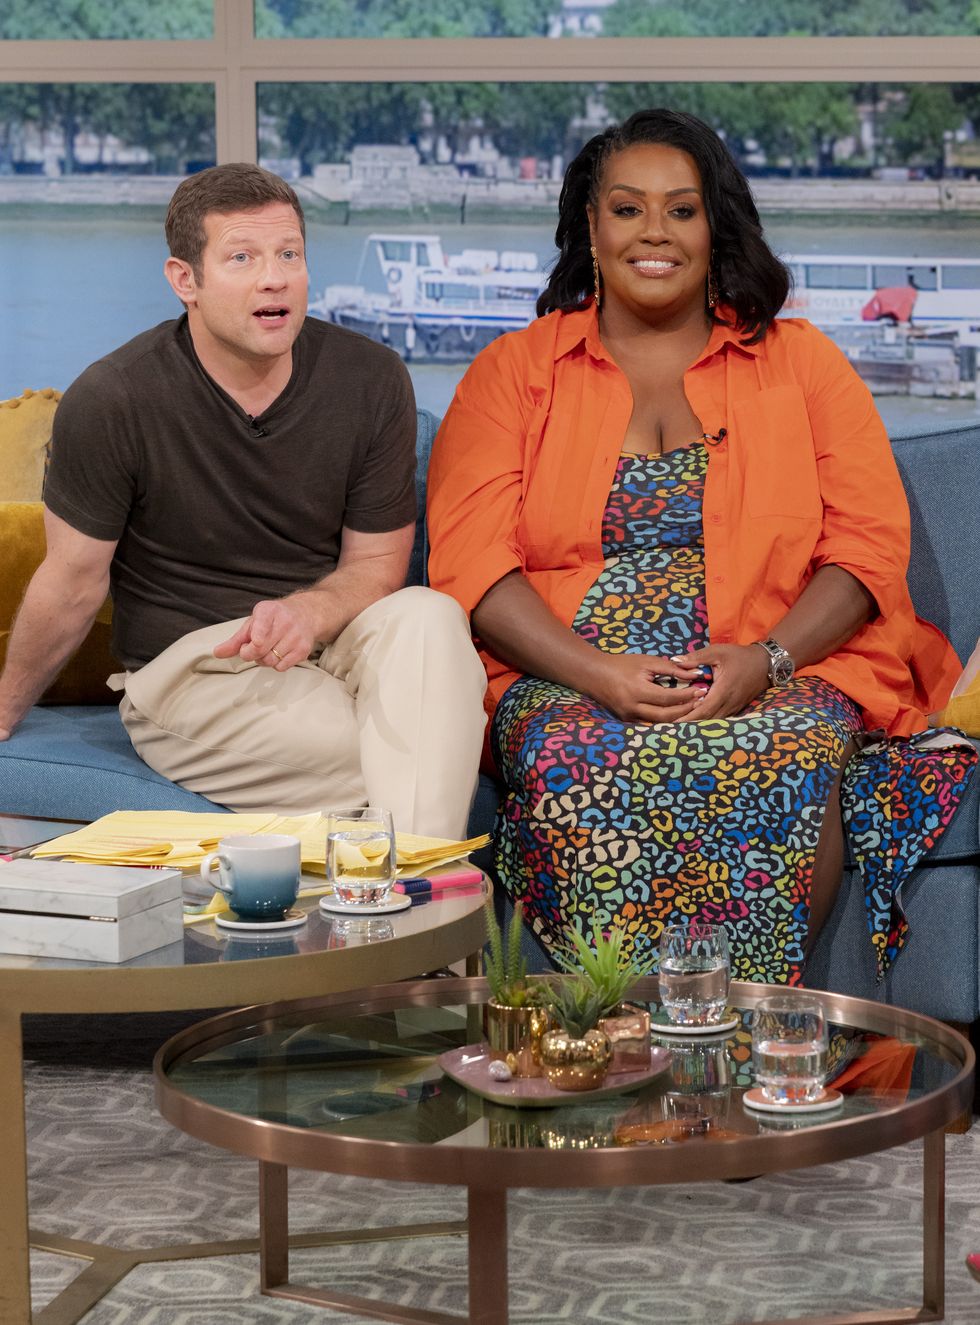 this morning's dermot o'leary and alison hammond sitting next to each other on a sofa on set